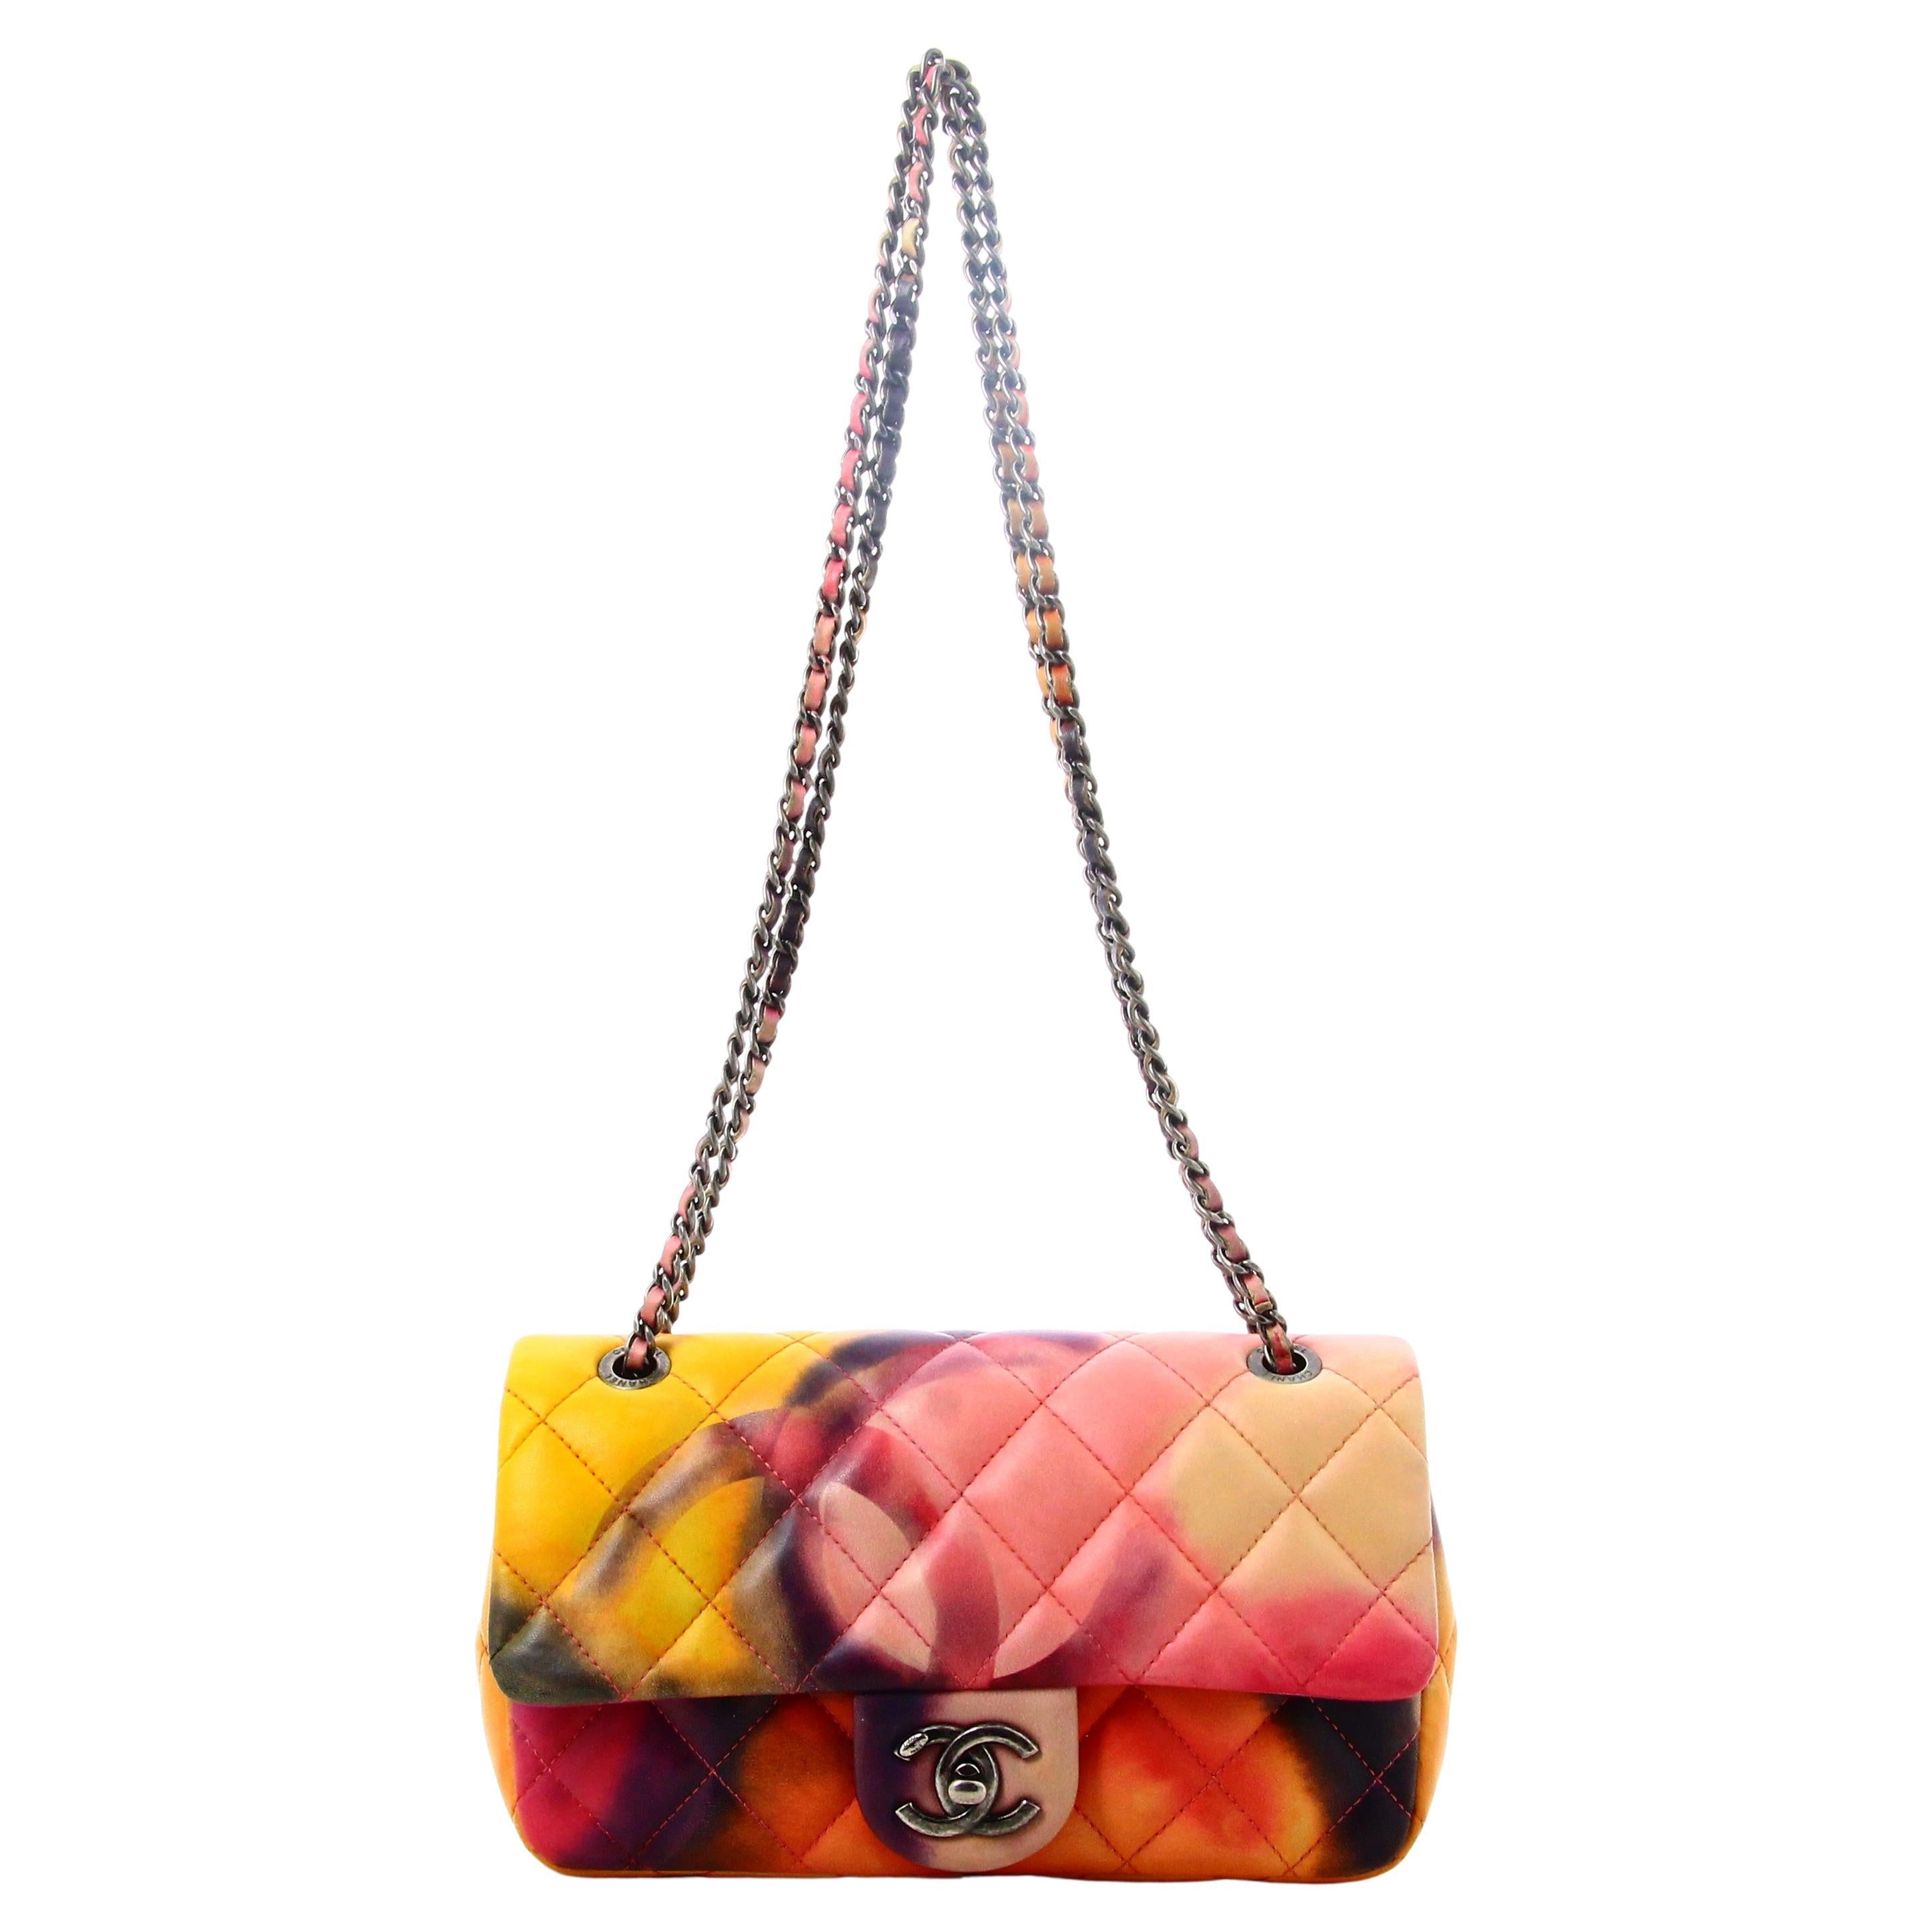 2015 Chanel Timeless Handbag Grafitti Multicolor Quilted Leather  For Sale